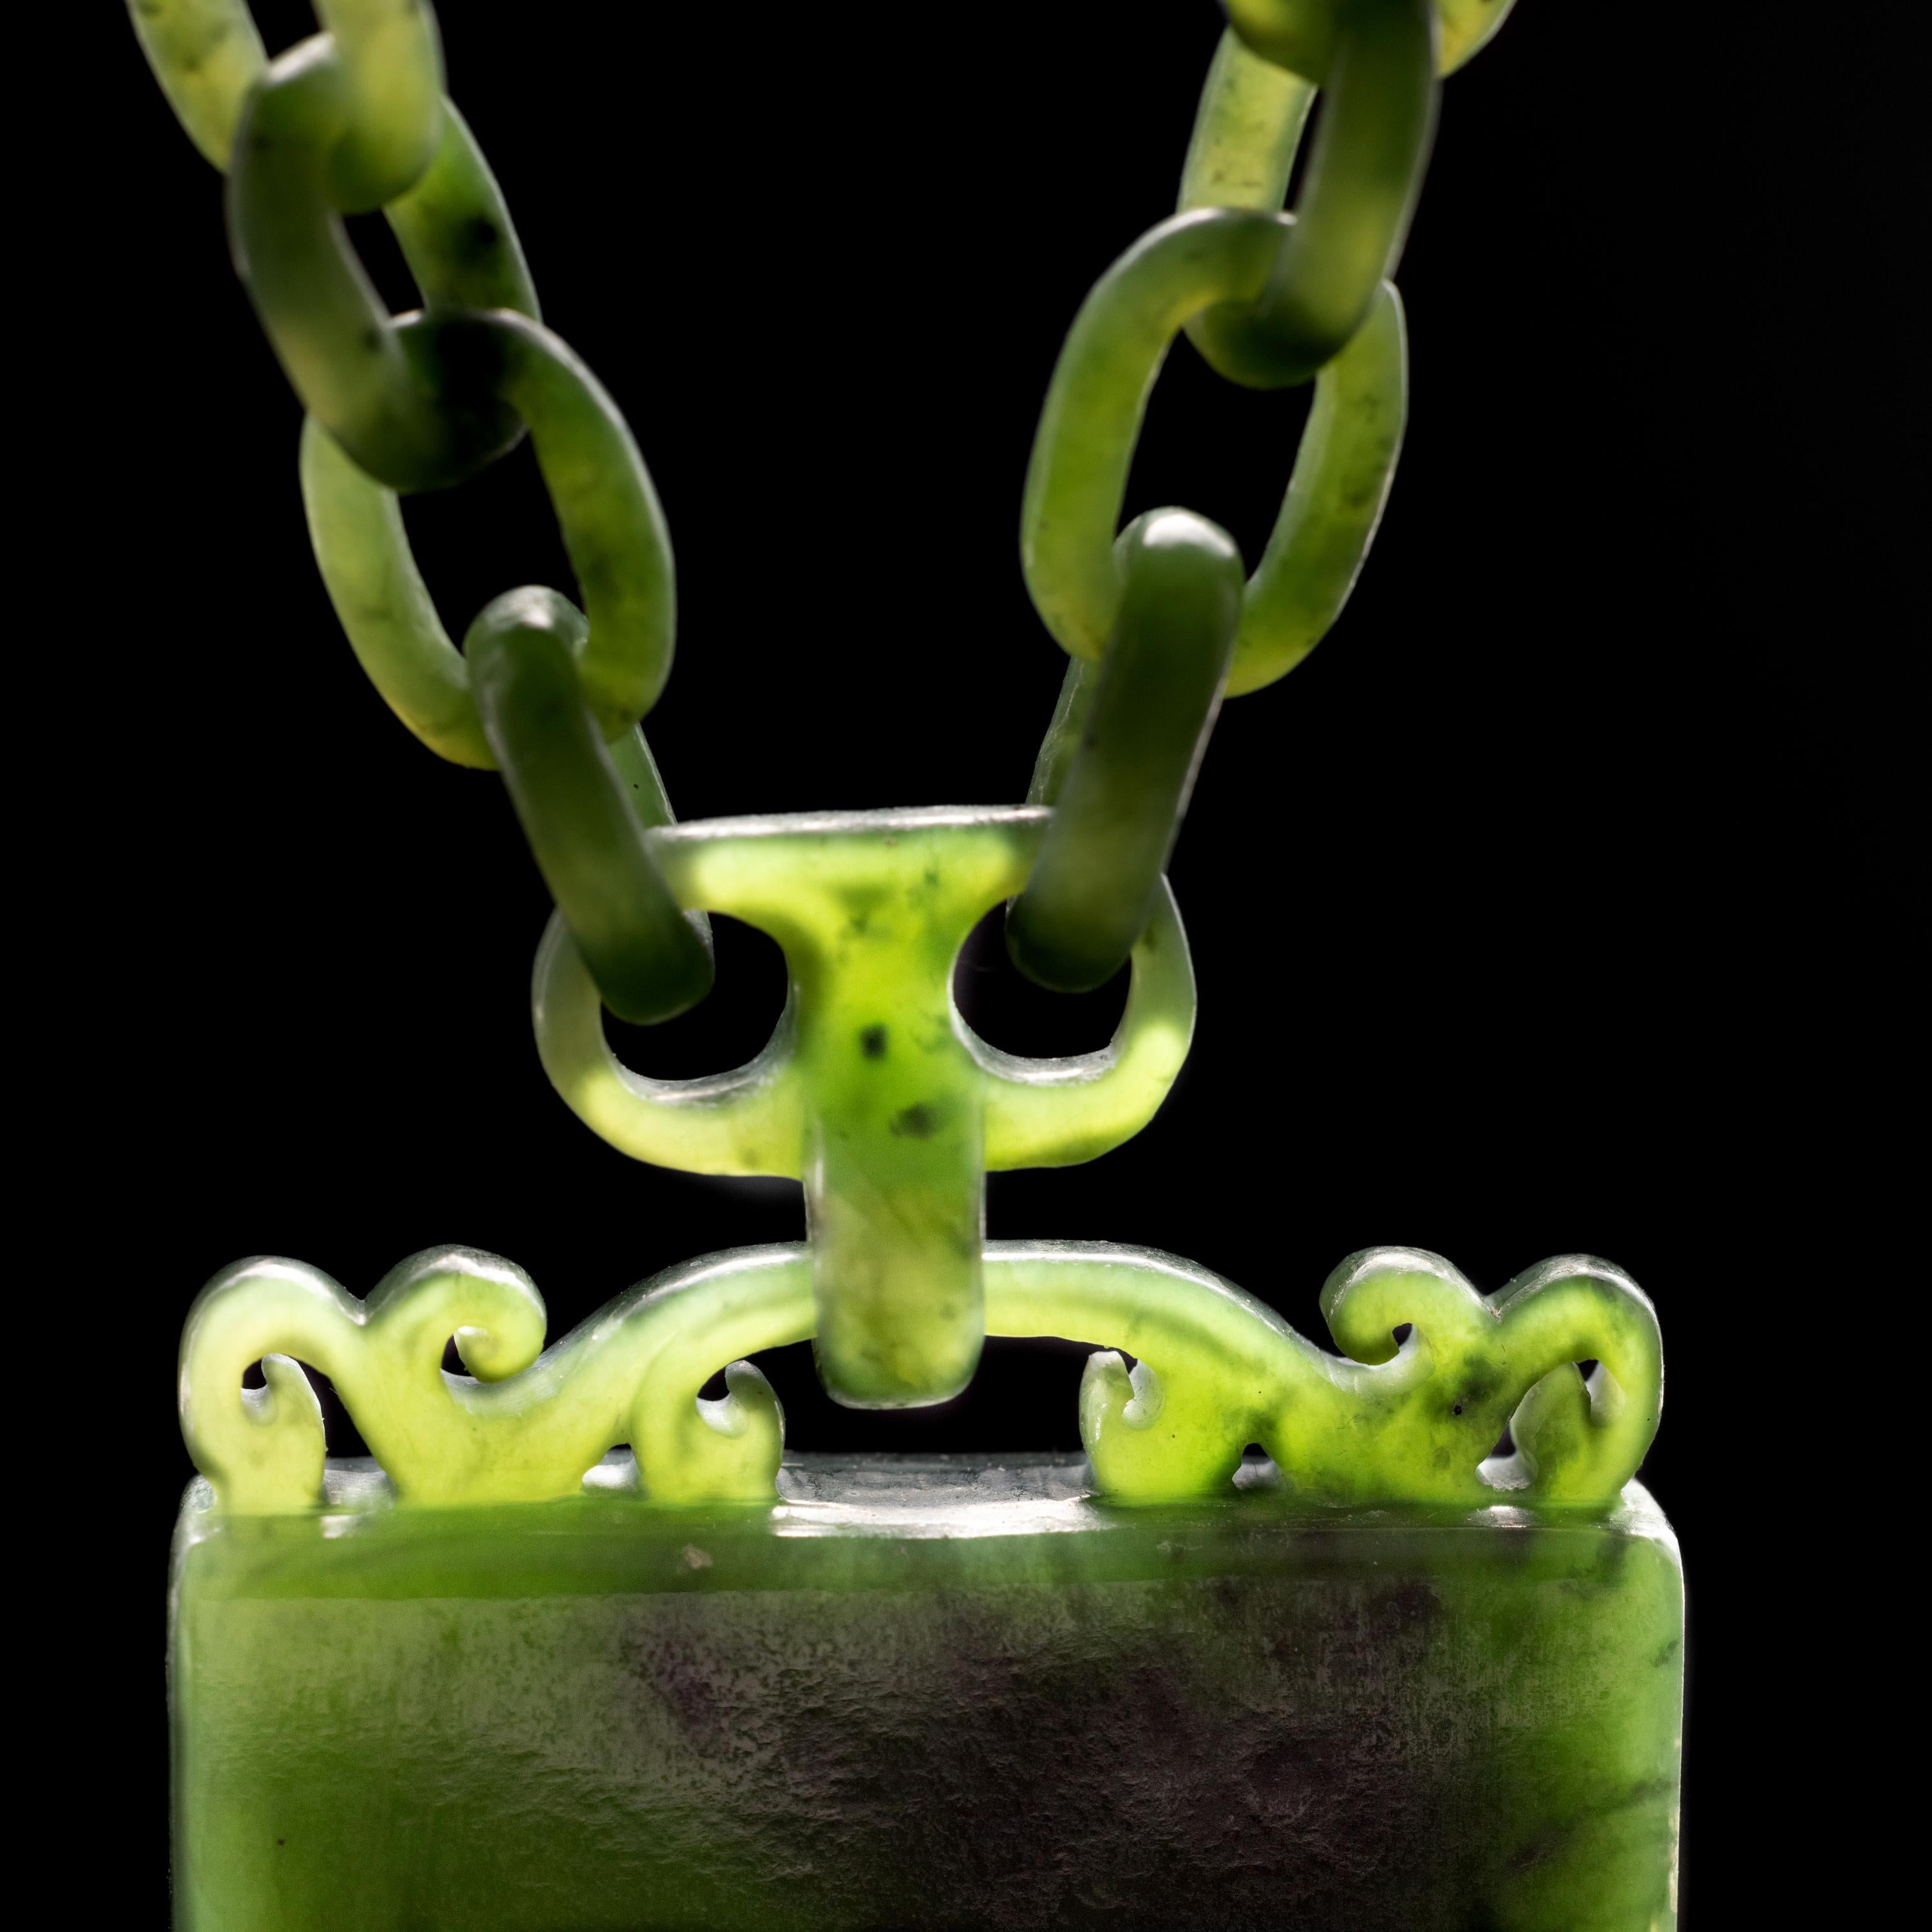 Cabochon Nephrite Jade Necklace Carved from Single Stone Certified Untreated